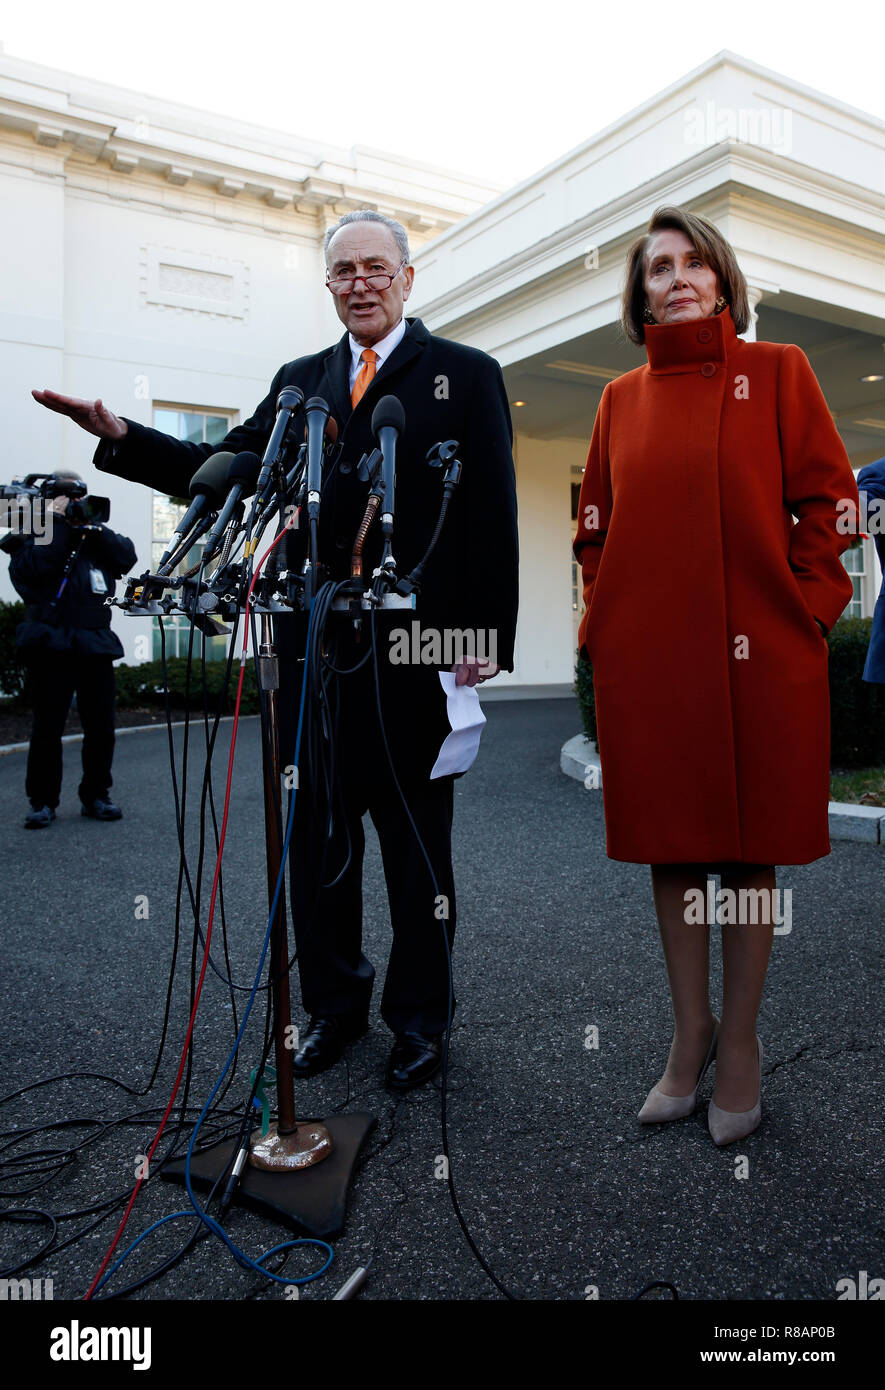 Washington, United States Of America. 11th Dec, 2018. United States Senate Minority Leader Chuck Schumer (Democrat of New York) and US House Speaker-designate Nancy Pelosi (Democrat of California) talk to reporters outside the West Wing of the White House following a contentious meeting with President Donald Trump on shutting down the government over border security differences, in Washington, DC, December 11, 2018. Credit: Martin H. Simon/CNP/AdMedia/Newscom/Alamy Live News Stock Photo